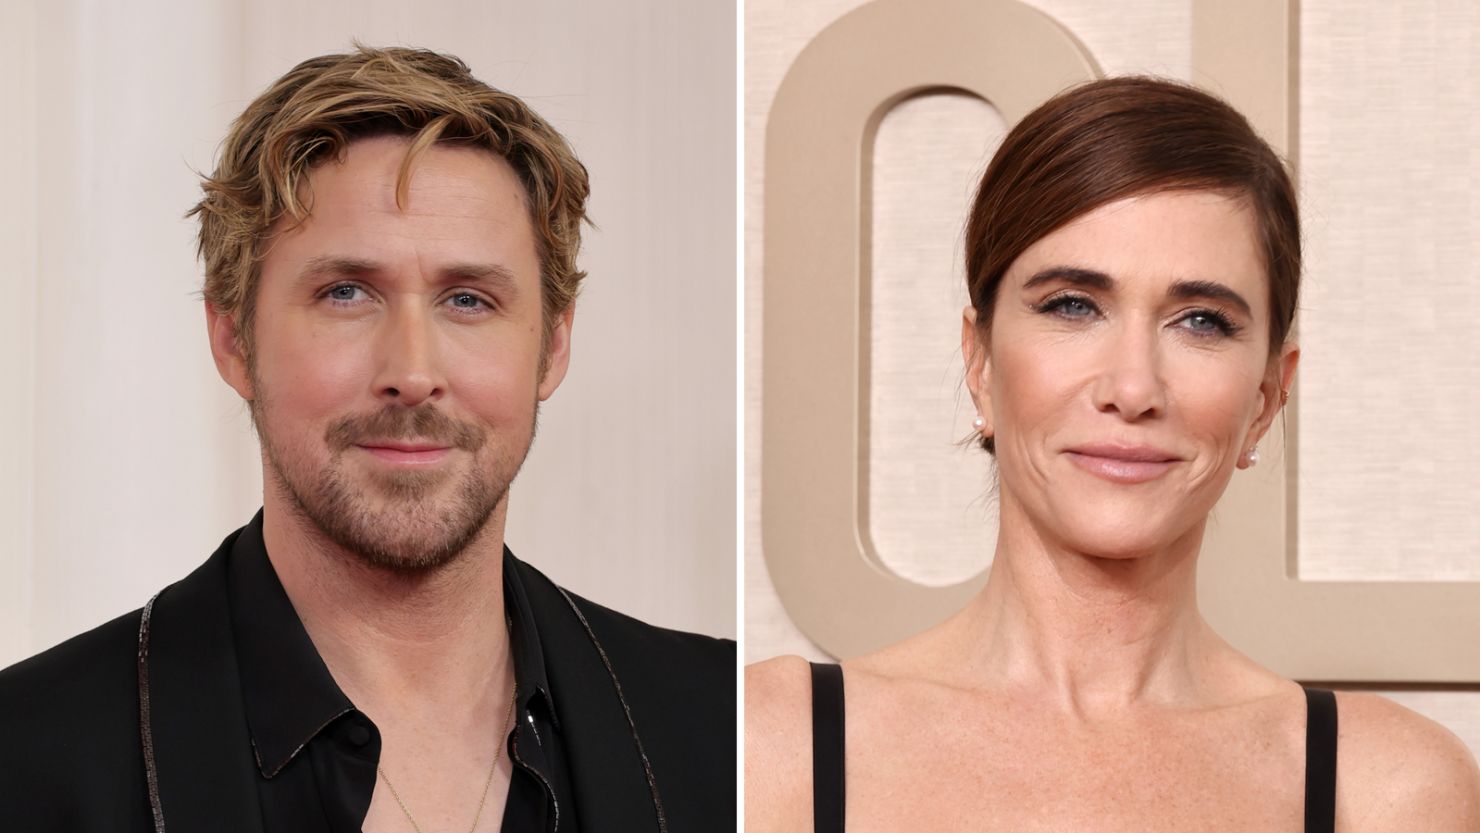 Ryan Gosling and Kristen Wiig set to host April episodes of ‘Saturday